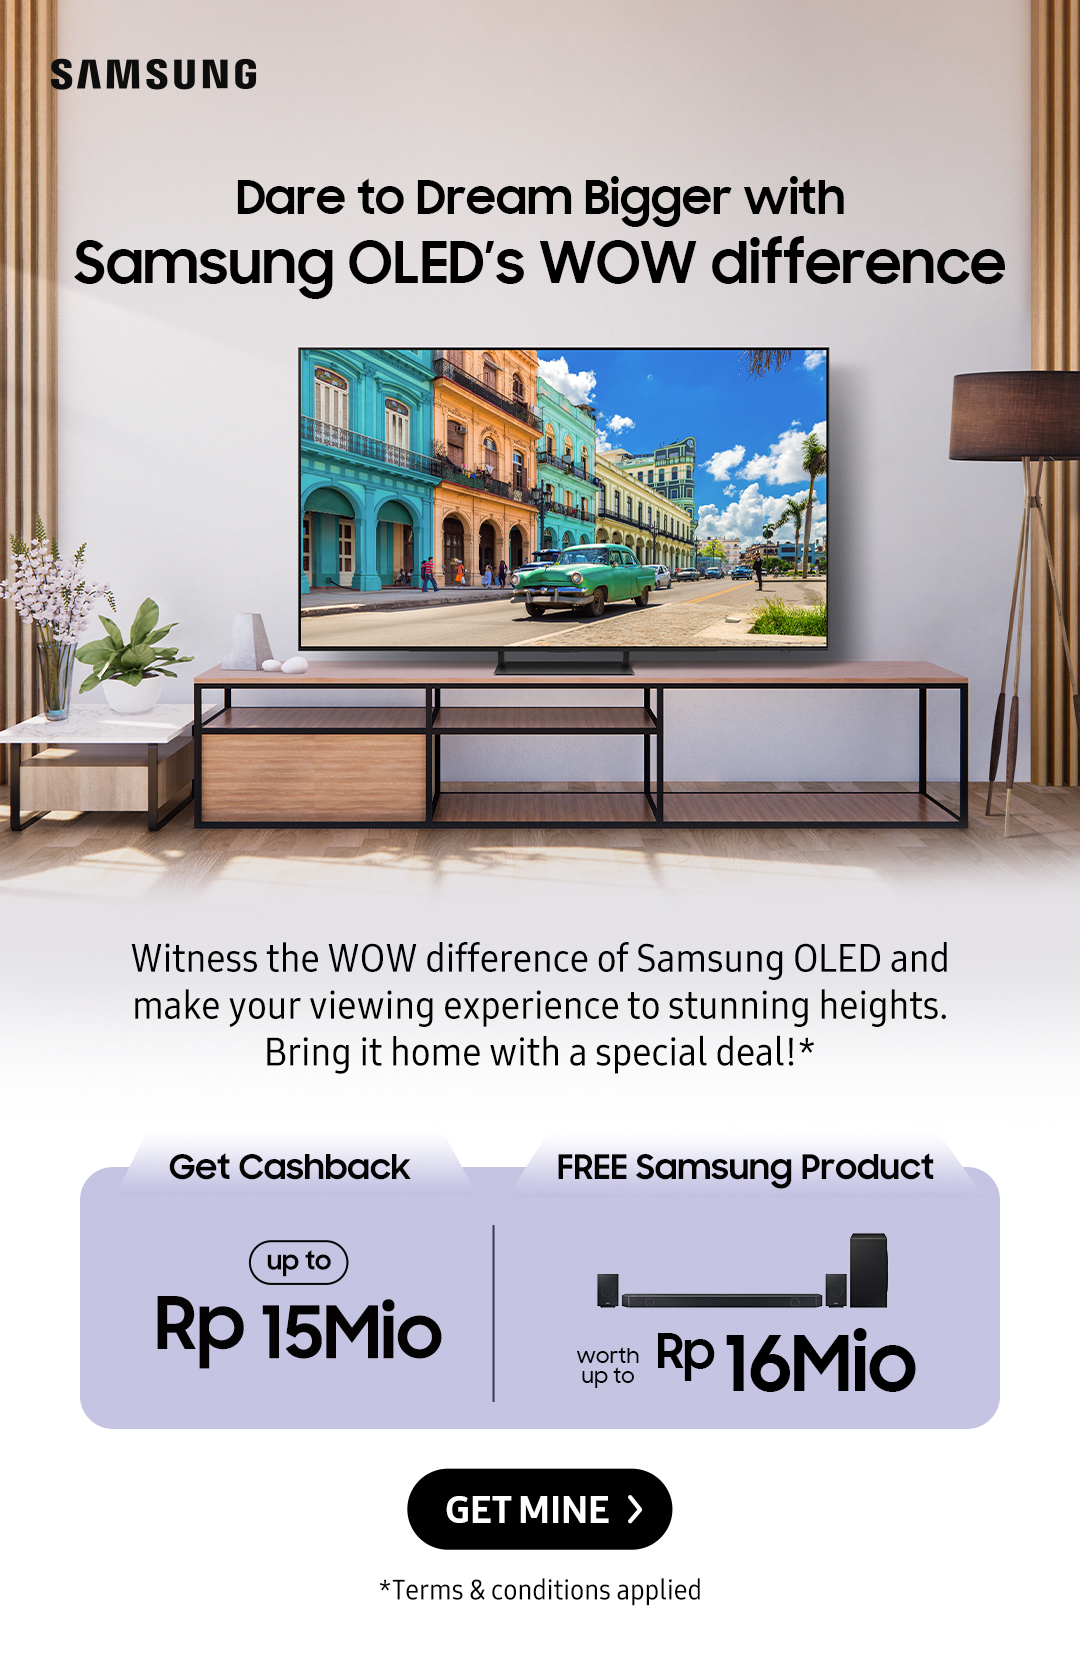 Dare to Dream Bigger with Samsung OLED's WOW difference | Witness the WOW difference of Samsung OLED and make your viewing experience to stunning heights. Bring it home with a special deal!*